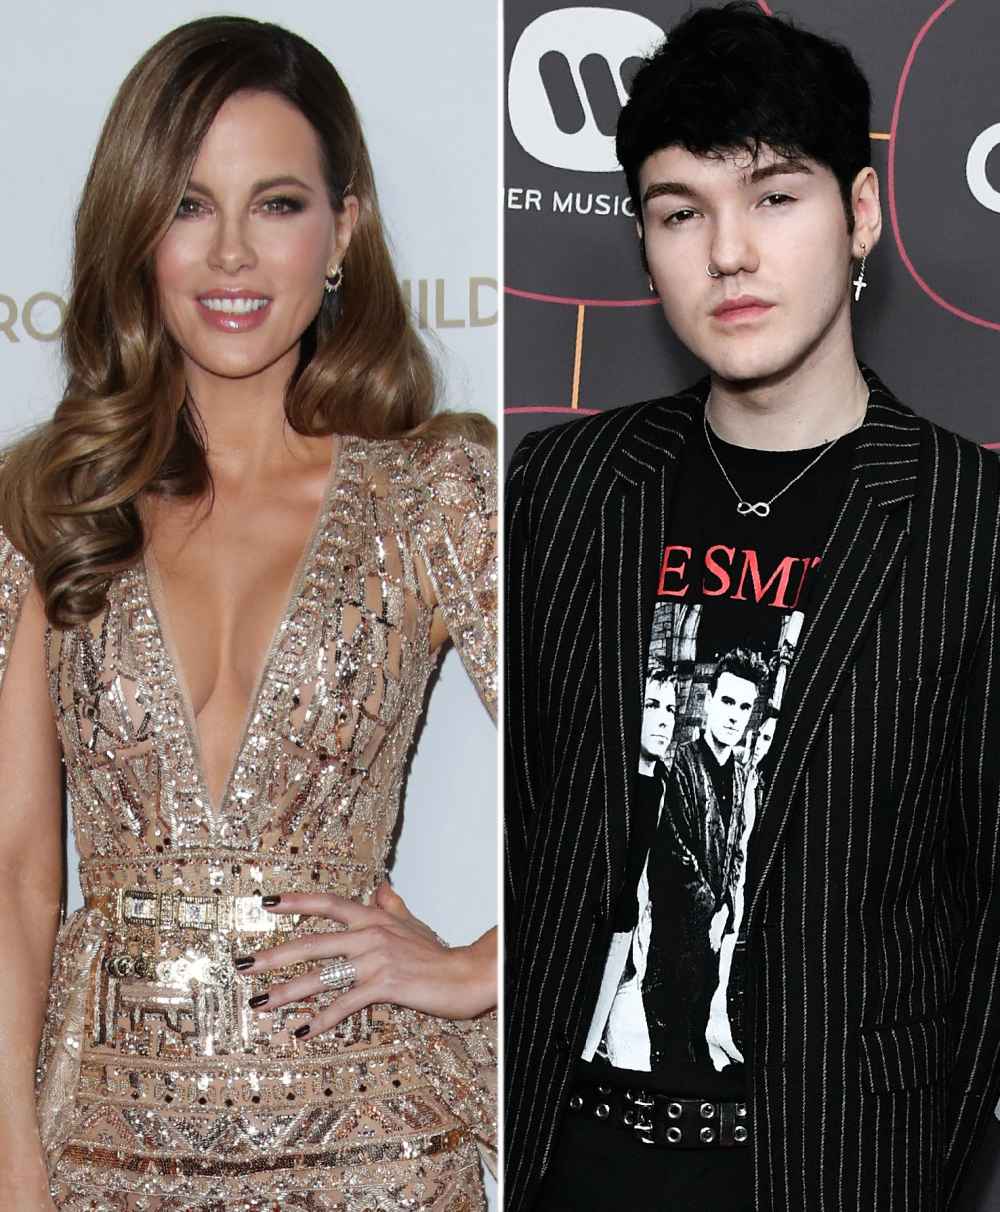 Kate Beckinsale Says I Love You to Boyfriend Goody Grace on His Birthday